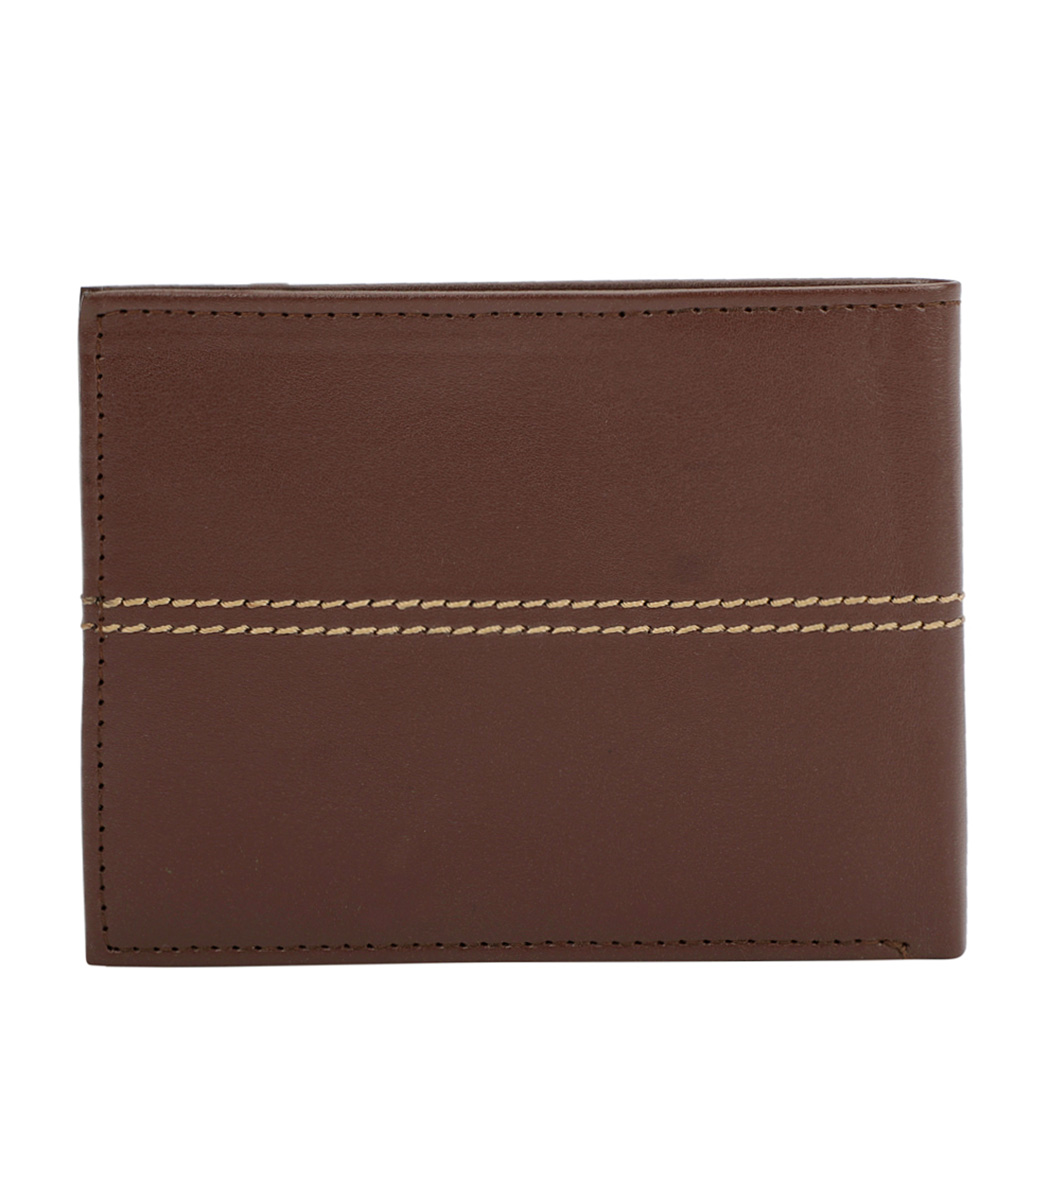 Unisex PU Leather Wallet, Brown | PW3 - SWISS MILITARY CONSUMER GOODS ...